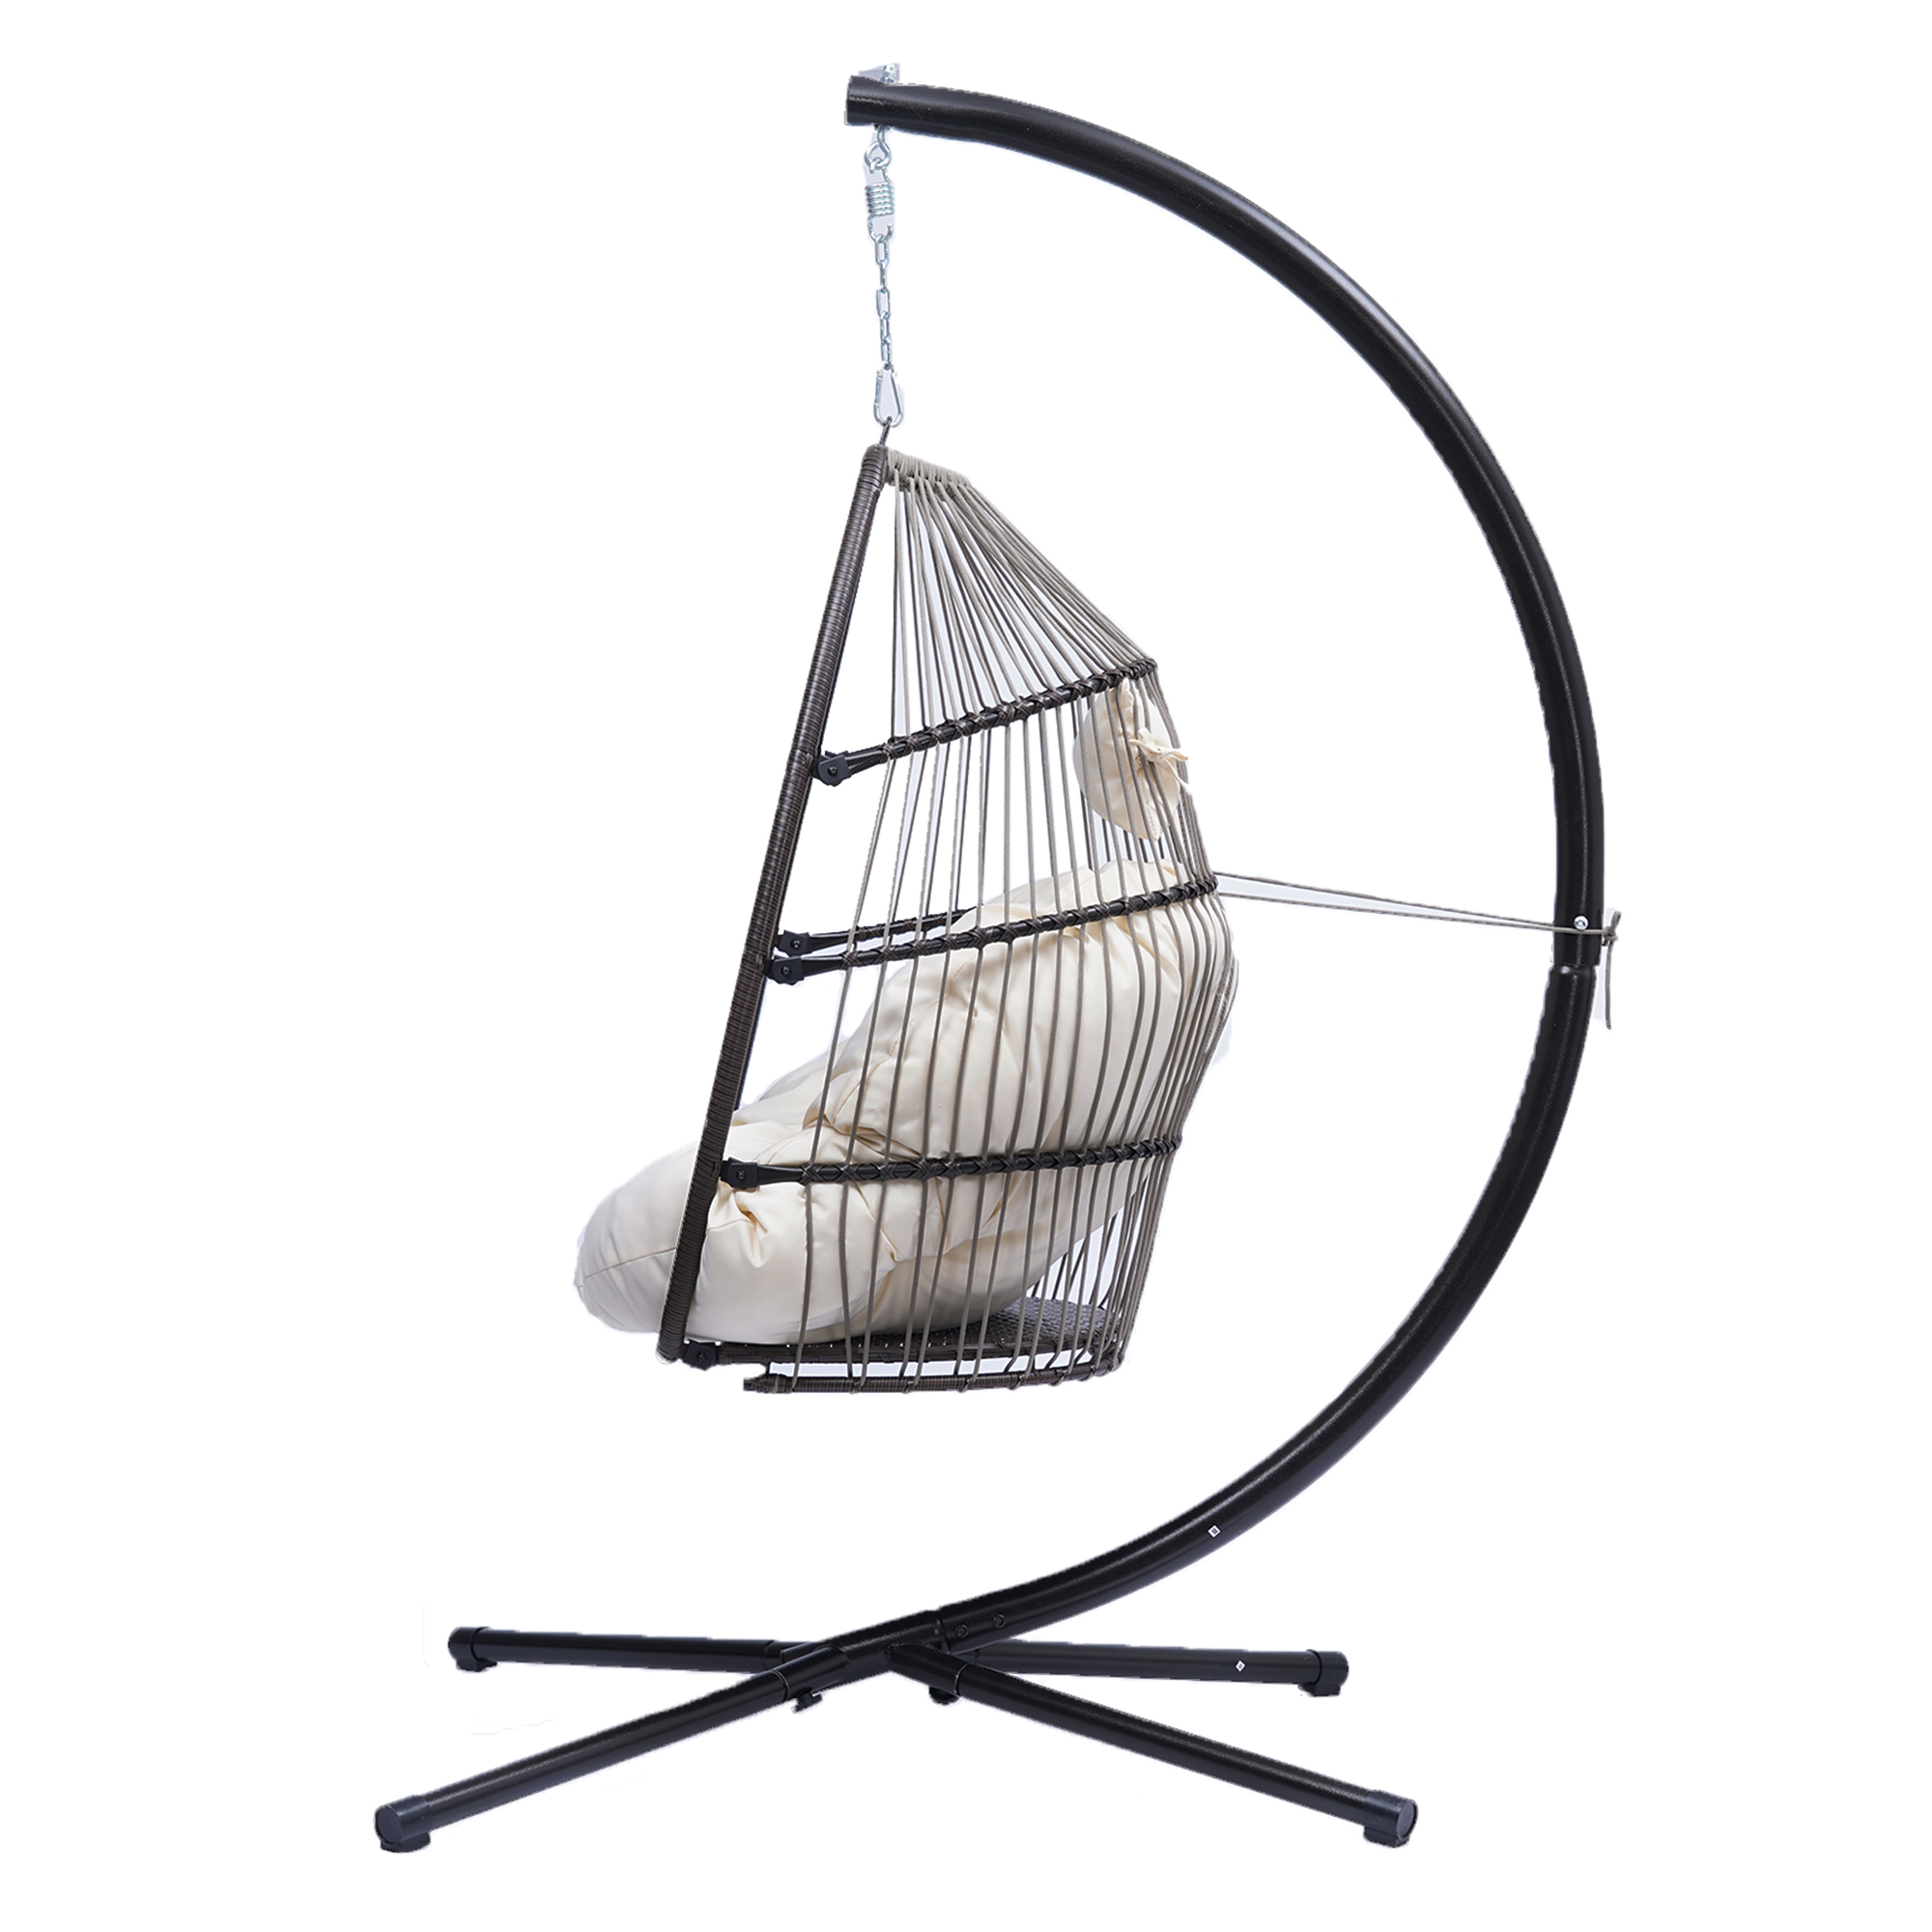 Rattan Swing Hammock Egg Chair With C Type Bracket , With Cushion And Pillow - W41928445